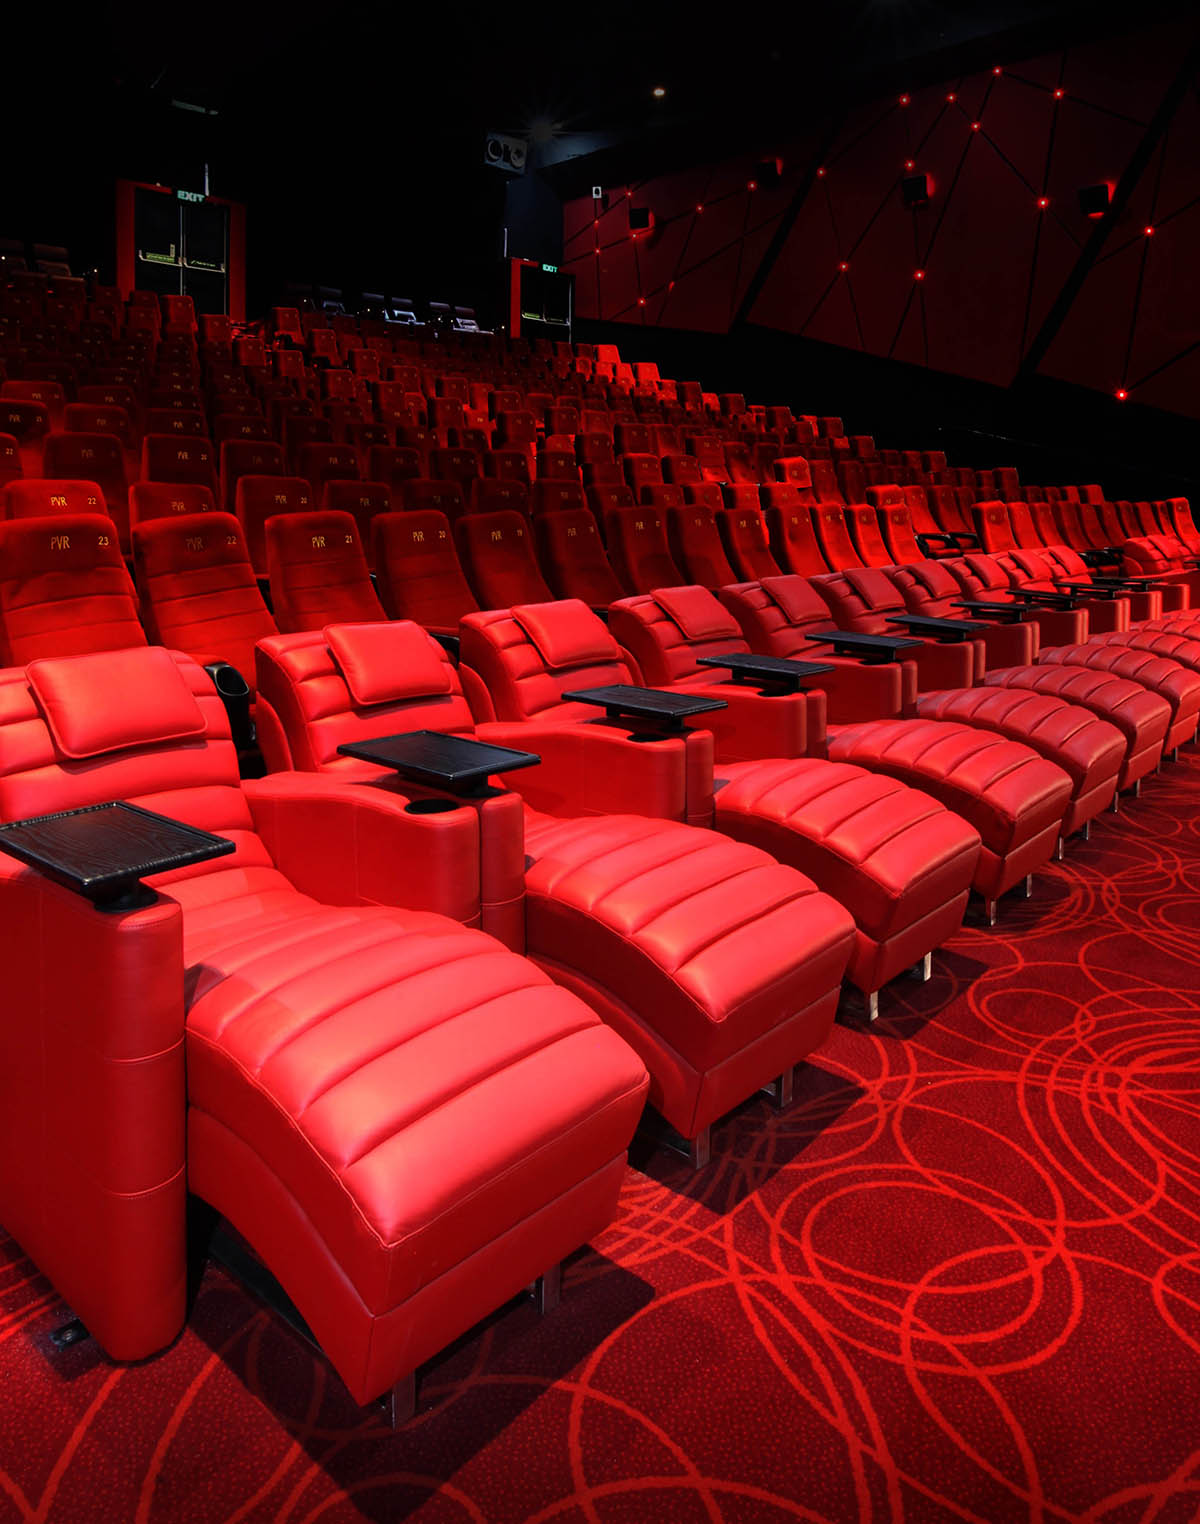 Style Belfort Lounger installed at PVR P[XL] Mumbai, pvr recliner seats, recliner seats in pvr, Recliners in pvr cinemas, couple recliner seats in pvr, lounger in pvr, recliner chair in pvr, recliner in pvr, recliner pvr, recliner chair pvr, pvr lounger pvr lounger seats, lounger seats in pvr, pvr prime seats, pvr gold class couple seats, how to open recliner chair in pvr, recliner theater seats, recliner seat cinema, recliner movie chairs, movie recliner, theatre reclinerm, recliner in movie theater, movie theater recliner seats, recliner movie seats, recliner seat theater, reclining seats movie theater, recliner seats in cinema, recliner movie theater near me, cinema chairs, bed theatre, gold seat in theatre, pvr gold class couple recliner seats